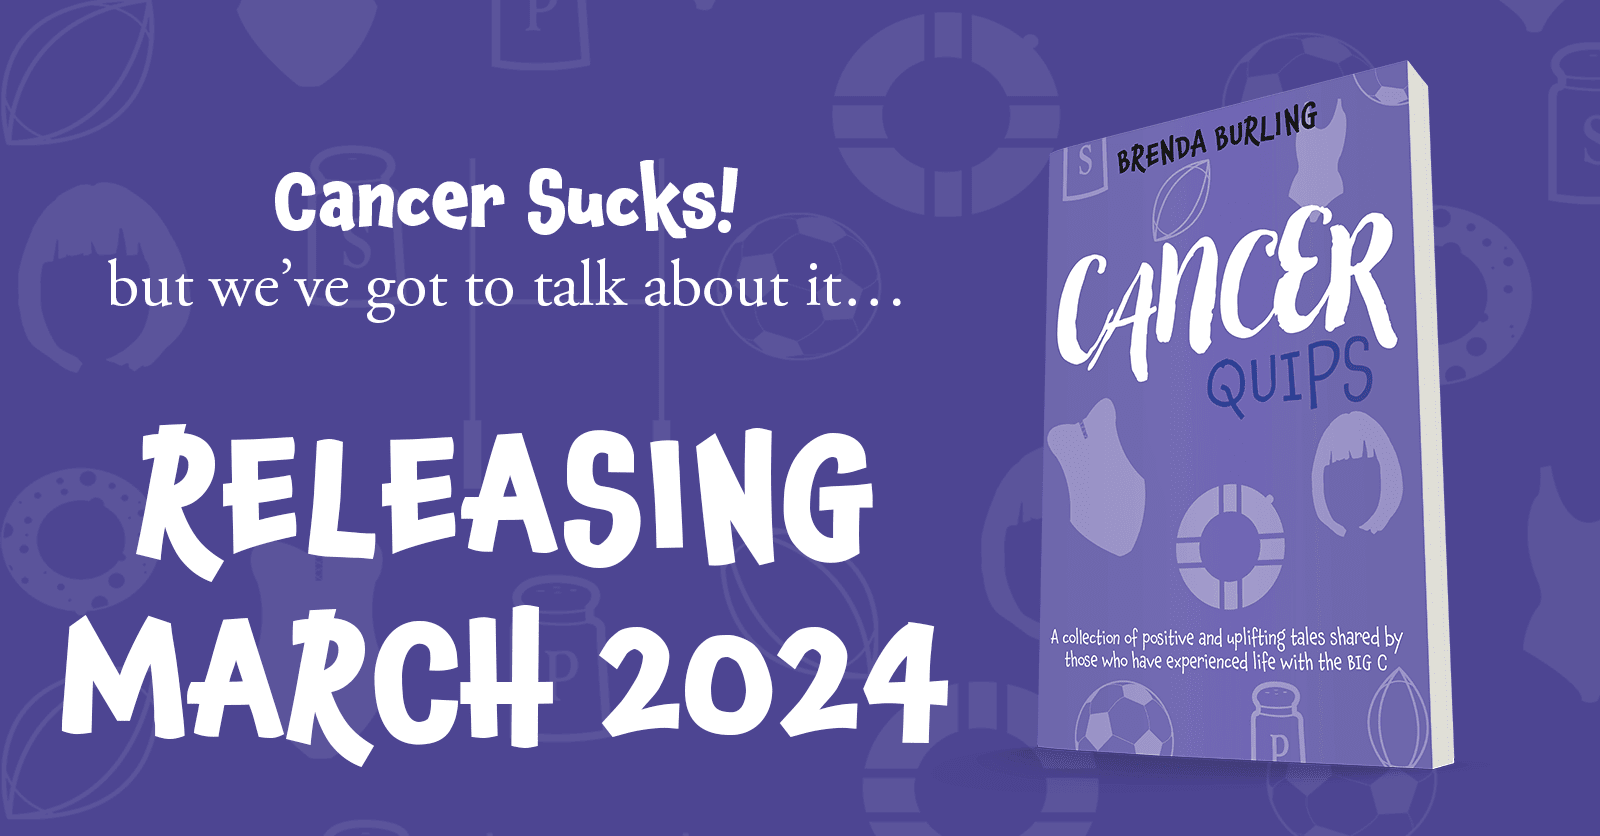 Promotional graphic for Cancer Quips by Brenda Burling